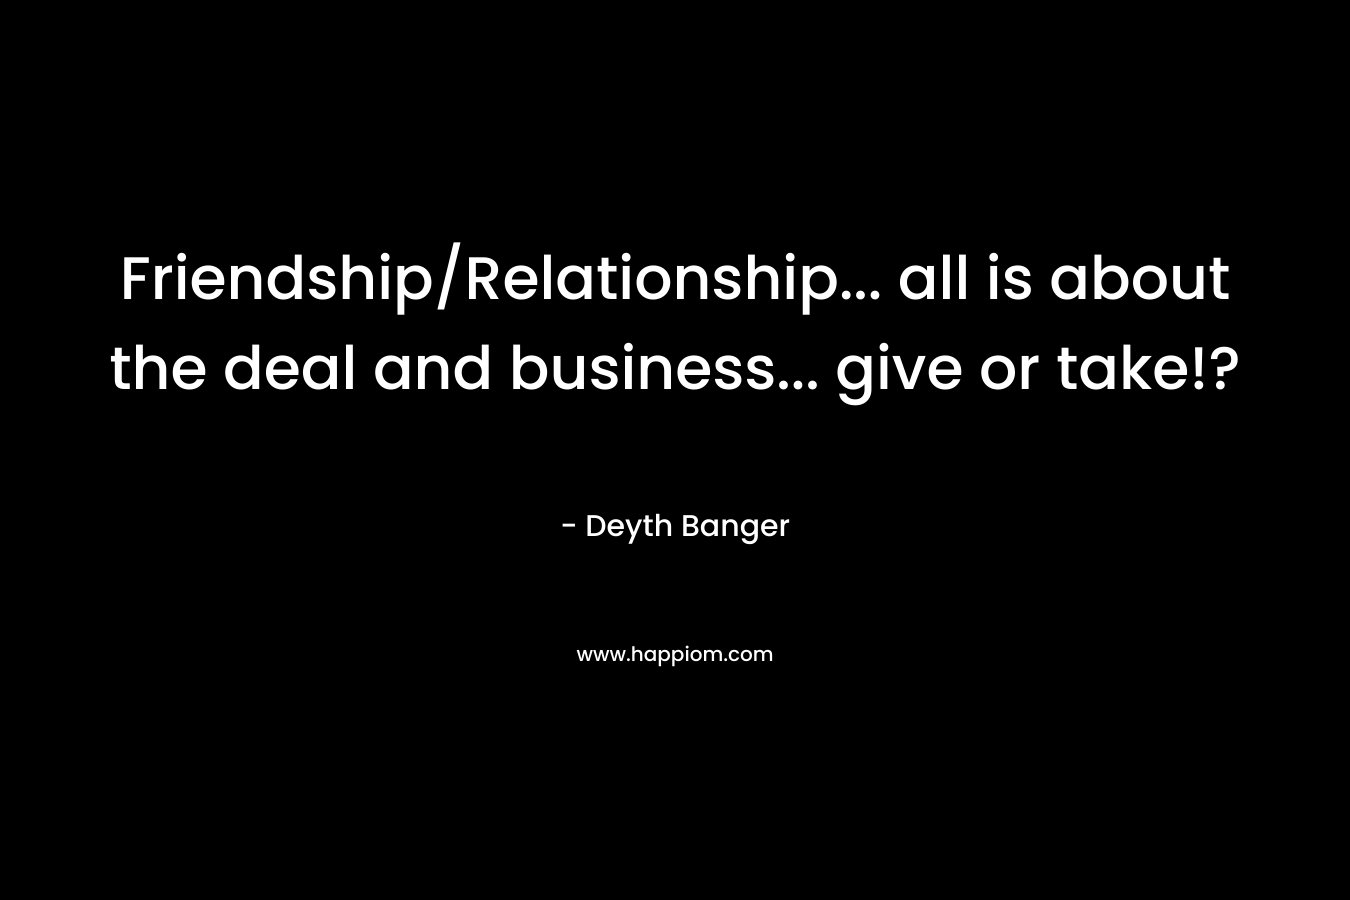 Friendship/Relationship... all is about the deal and business... give or take!?